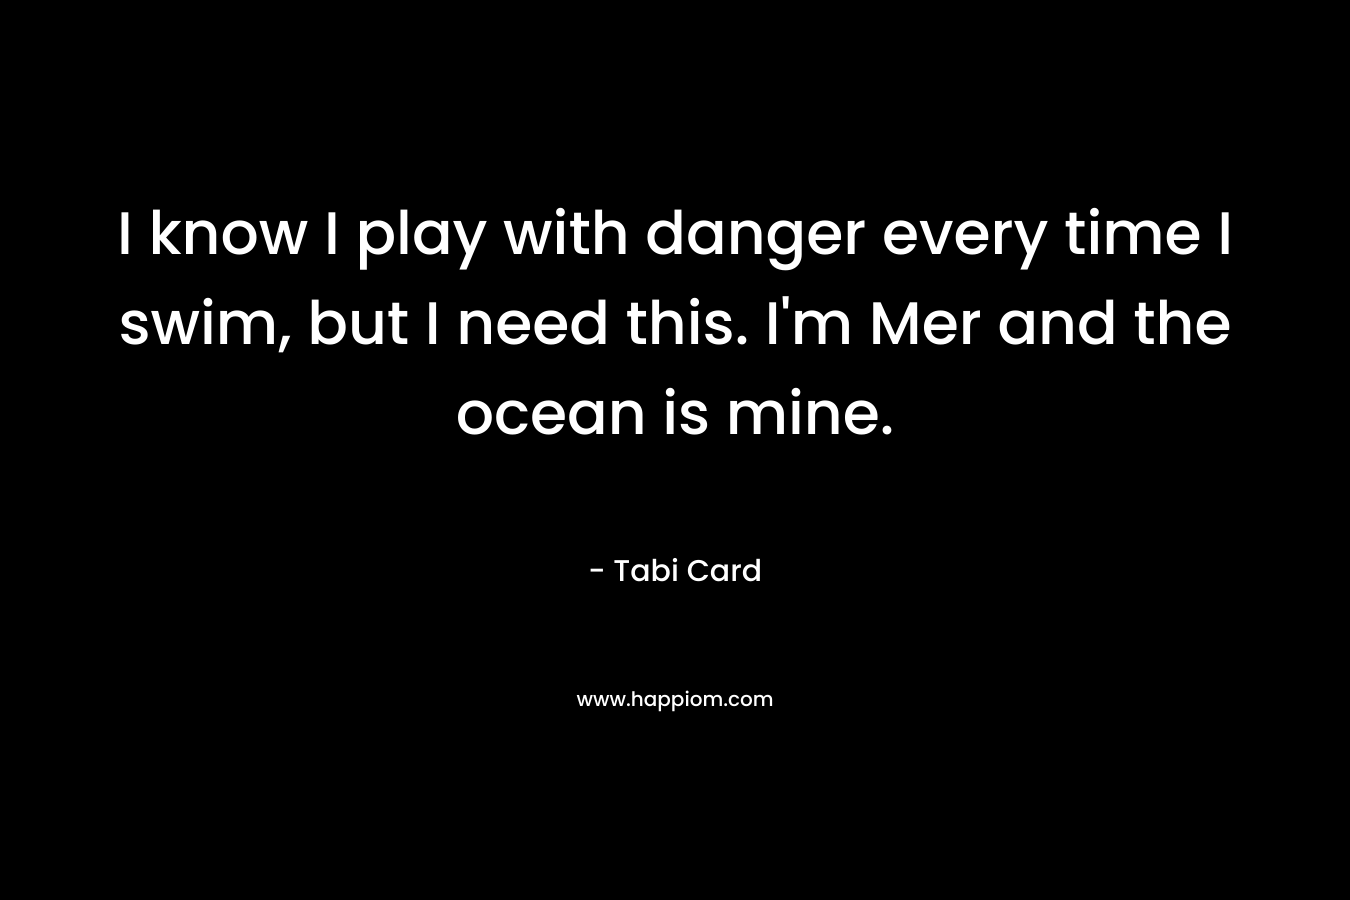 I know I play with danger every time I swim, but I need this. I’m Mer and the ocean is mine. – Tabi Card